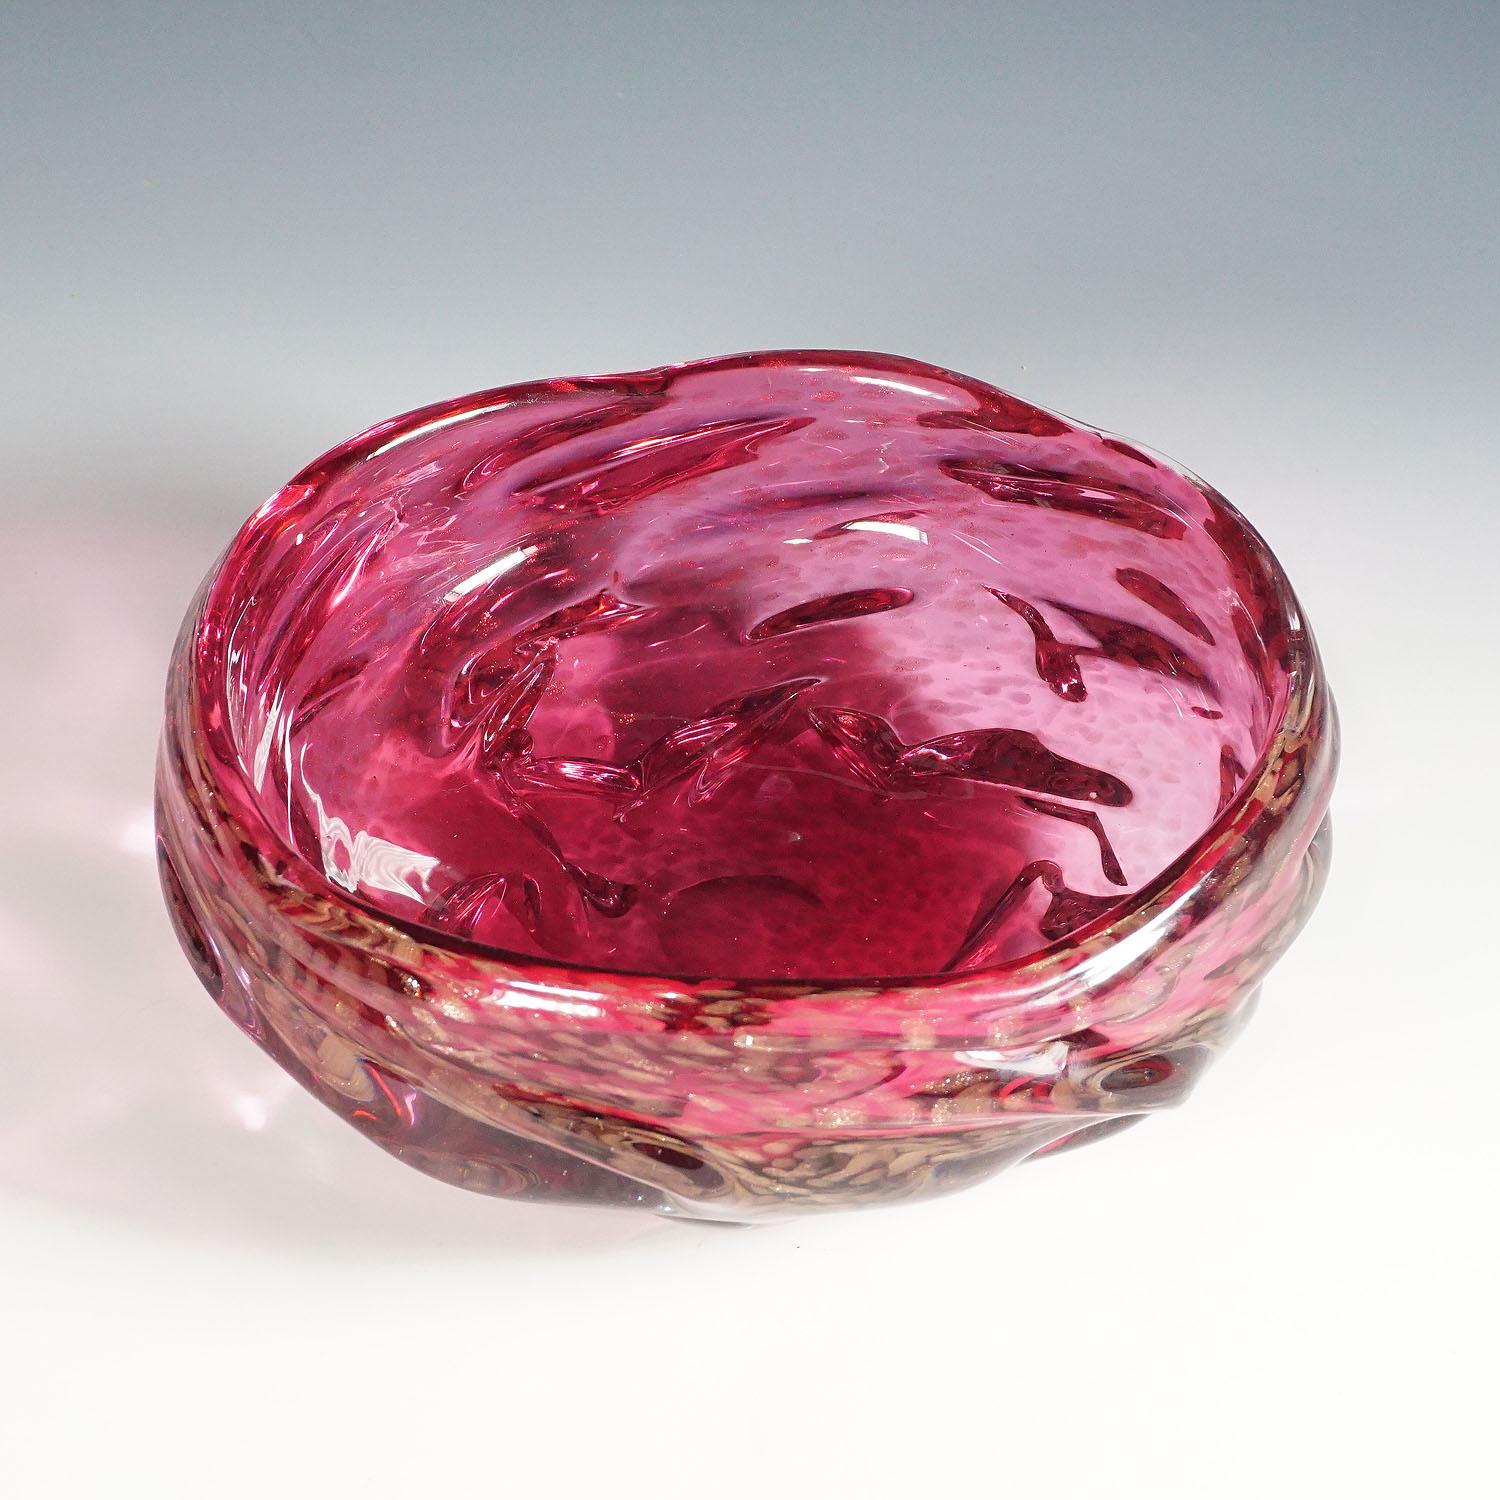 Mid-Century Modern Large Murano Art Glass Bowl in Pink Glass with Aventurines, 1950s